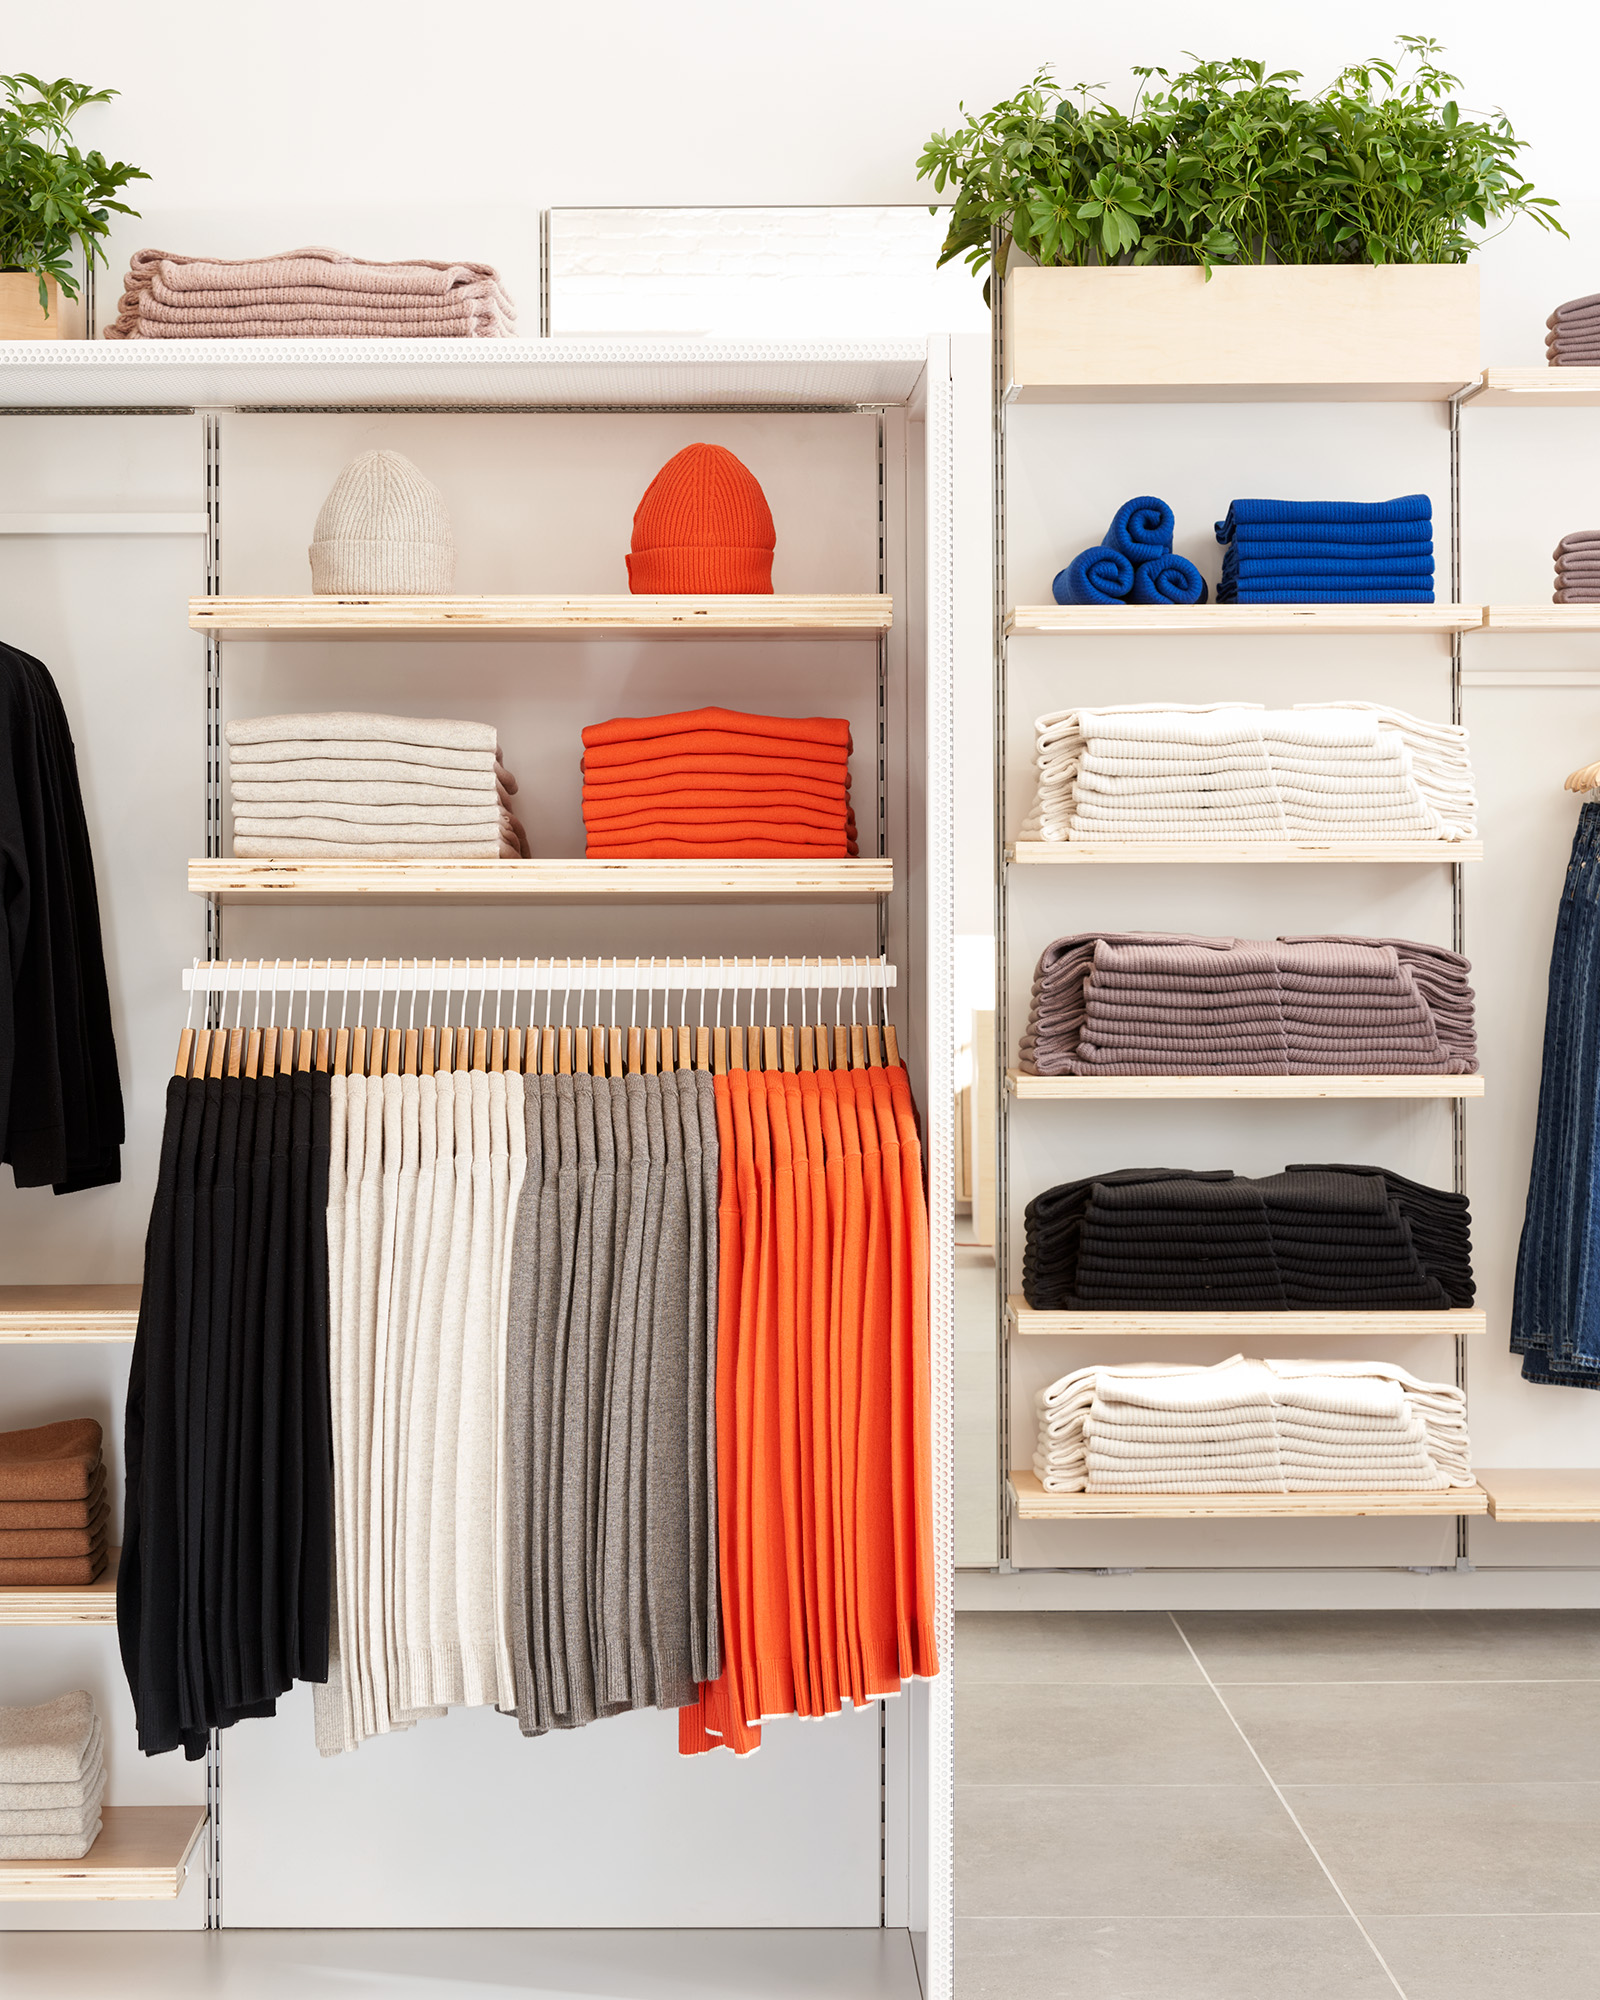 Everlane Opened Its Newest Store in Georgetown Today - Washingtonian